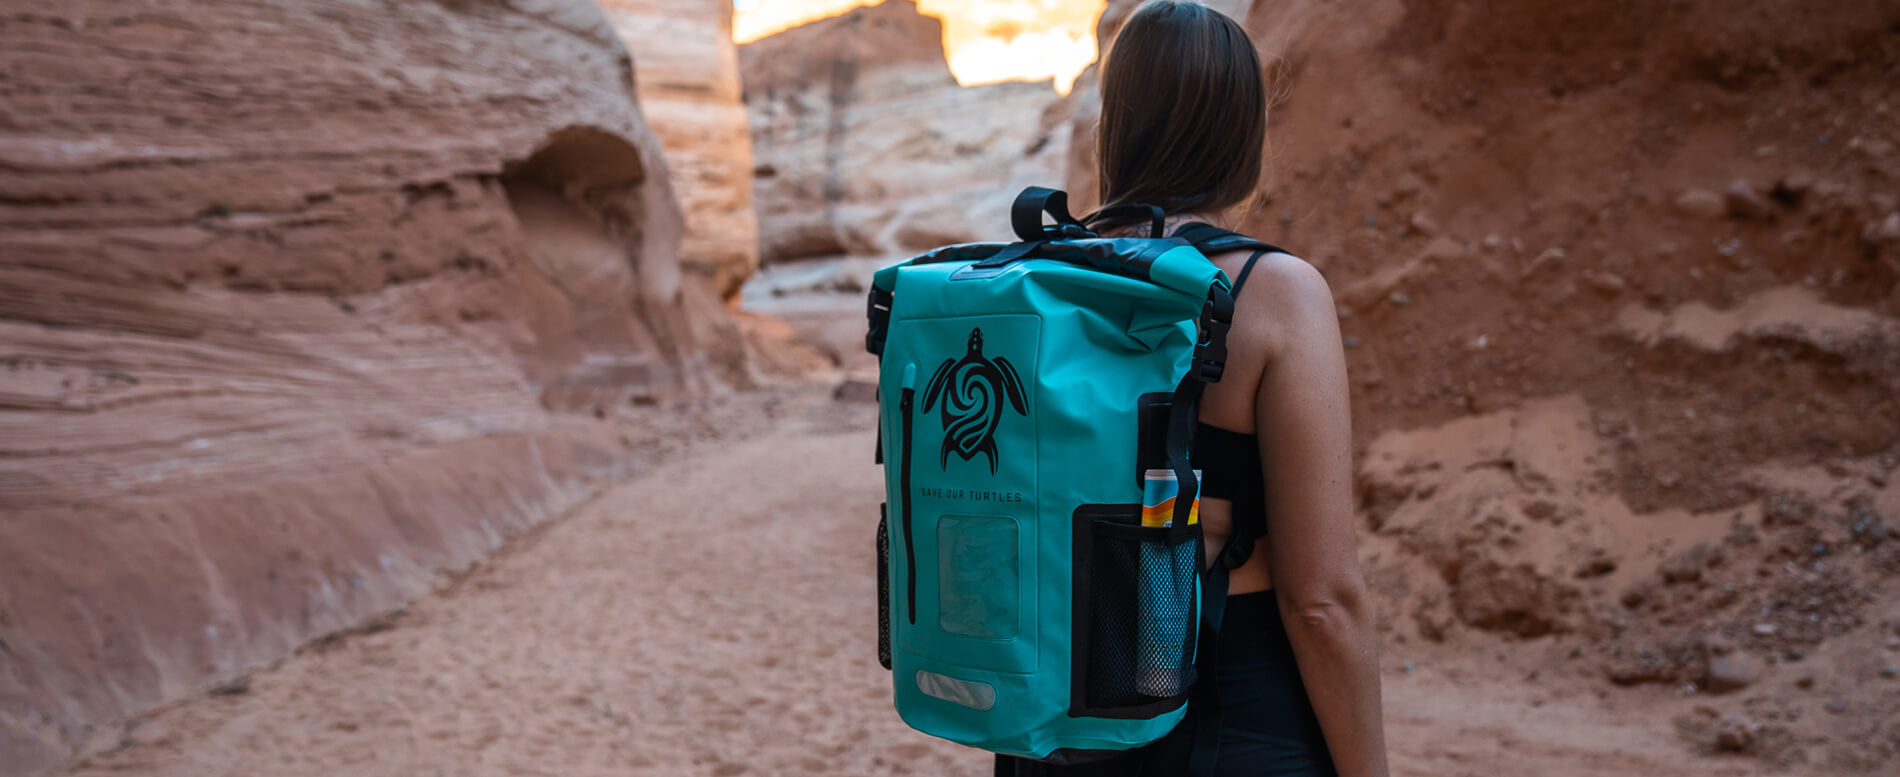 Woman with a teal roll top waterproof backpack